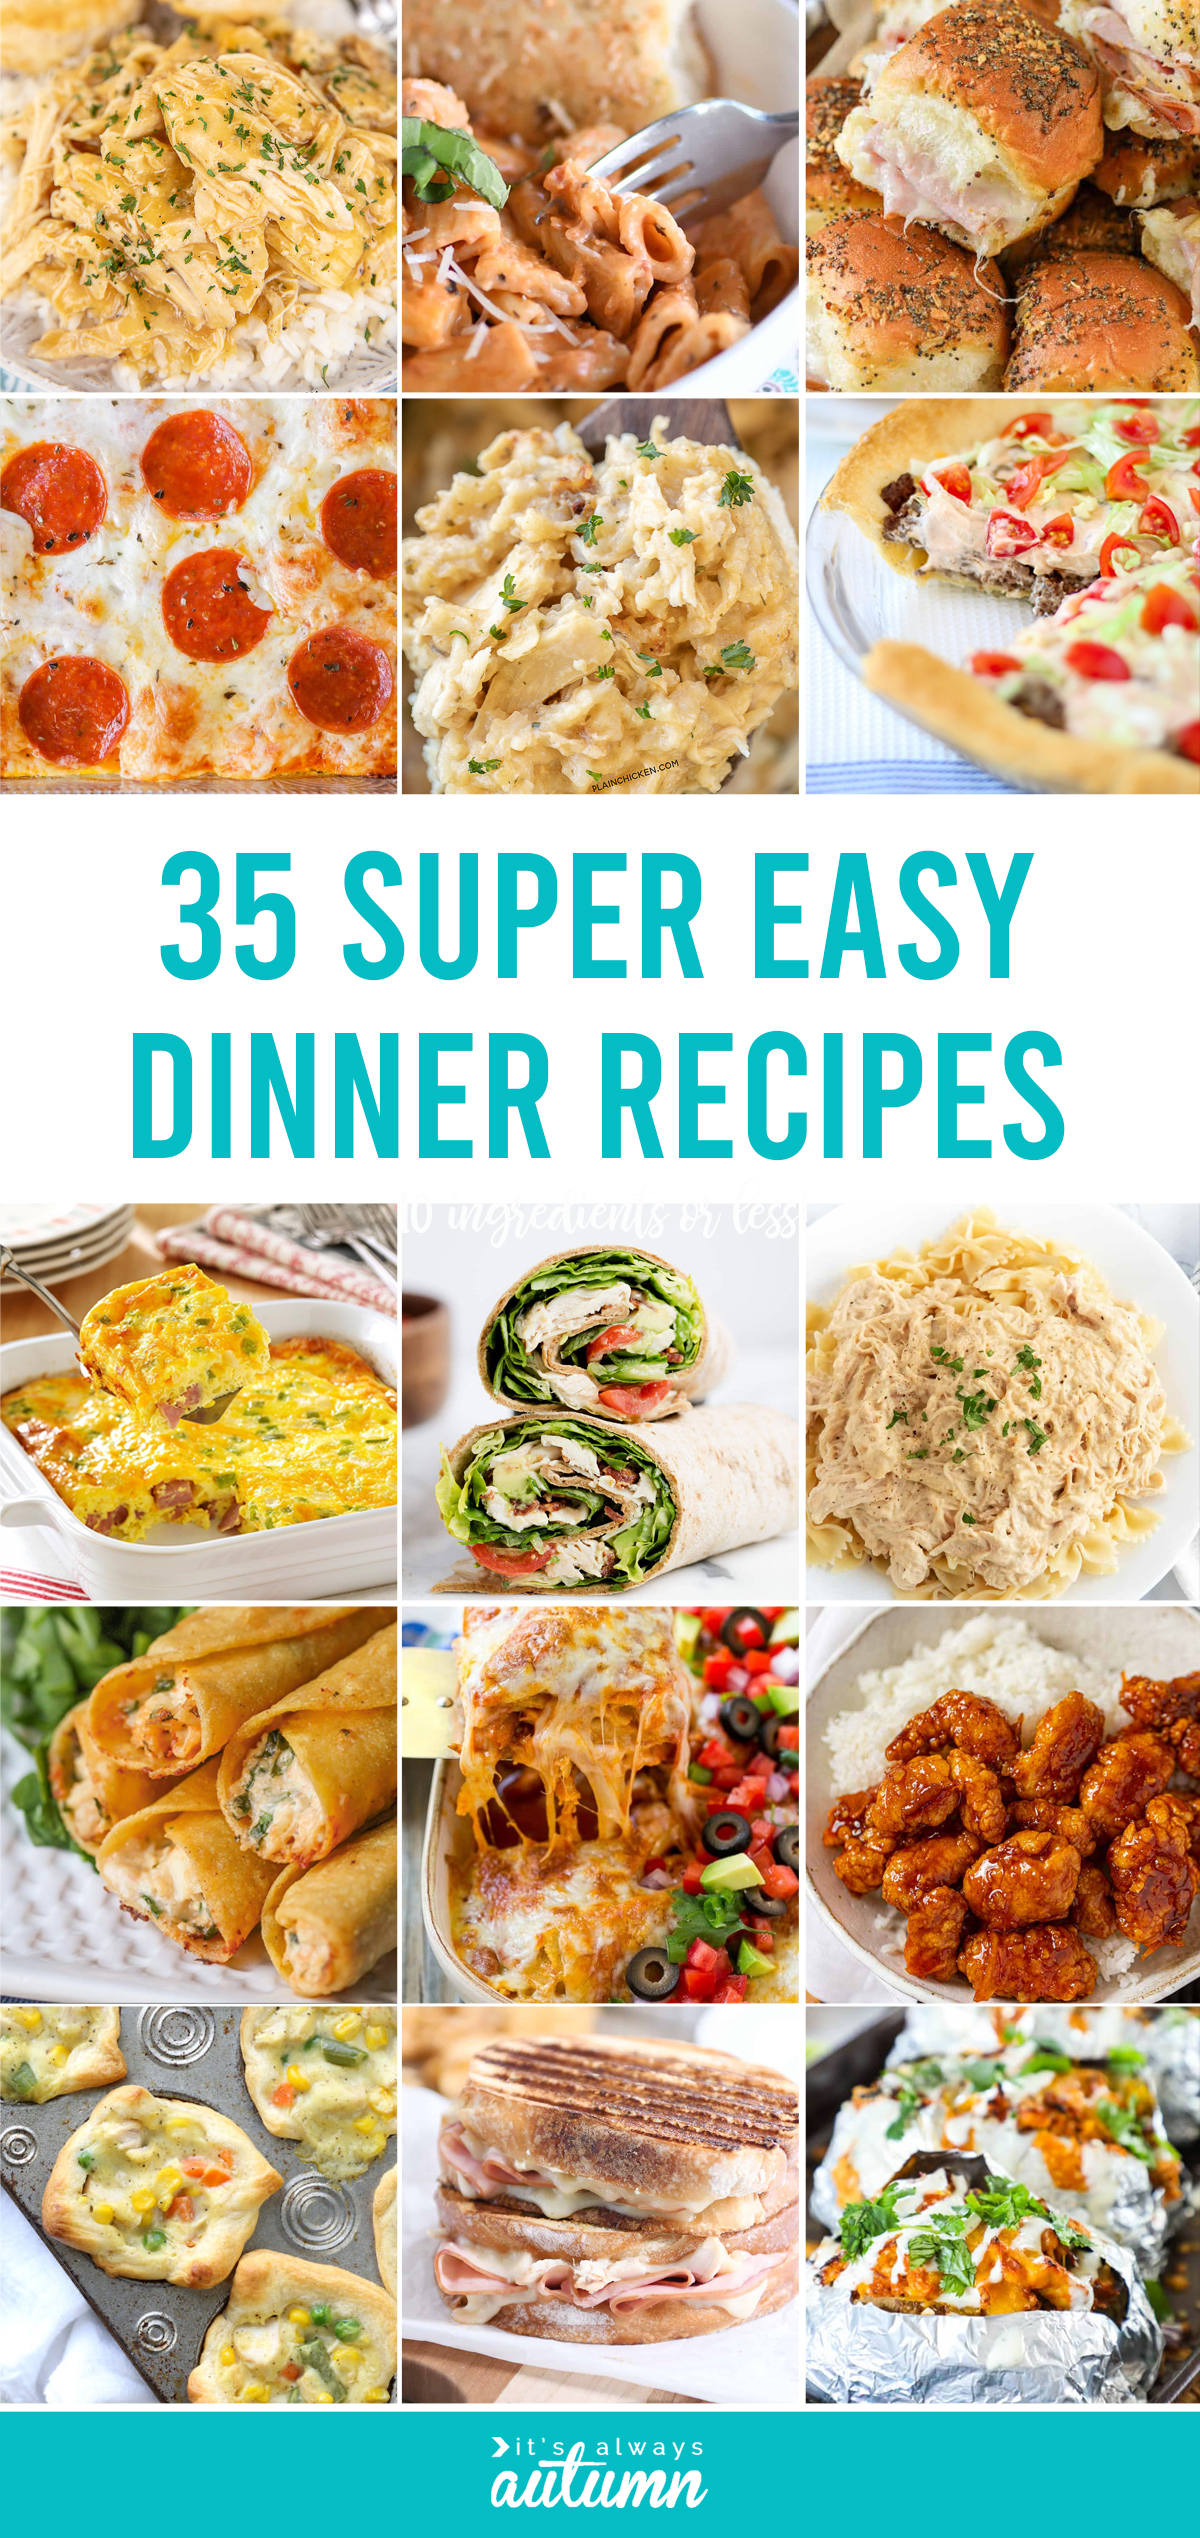 35 super easy dinner recipes - each of these simple dinner ideas uses 10 ingredients or less!